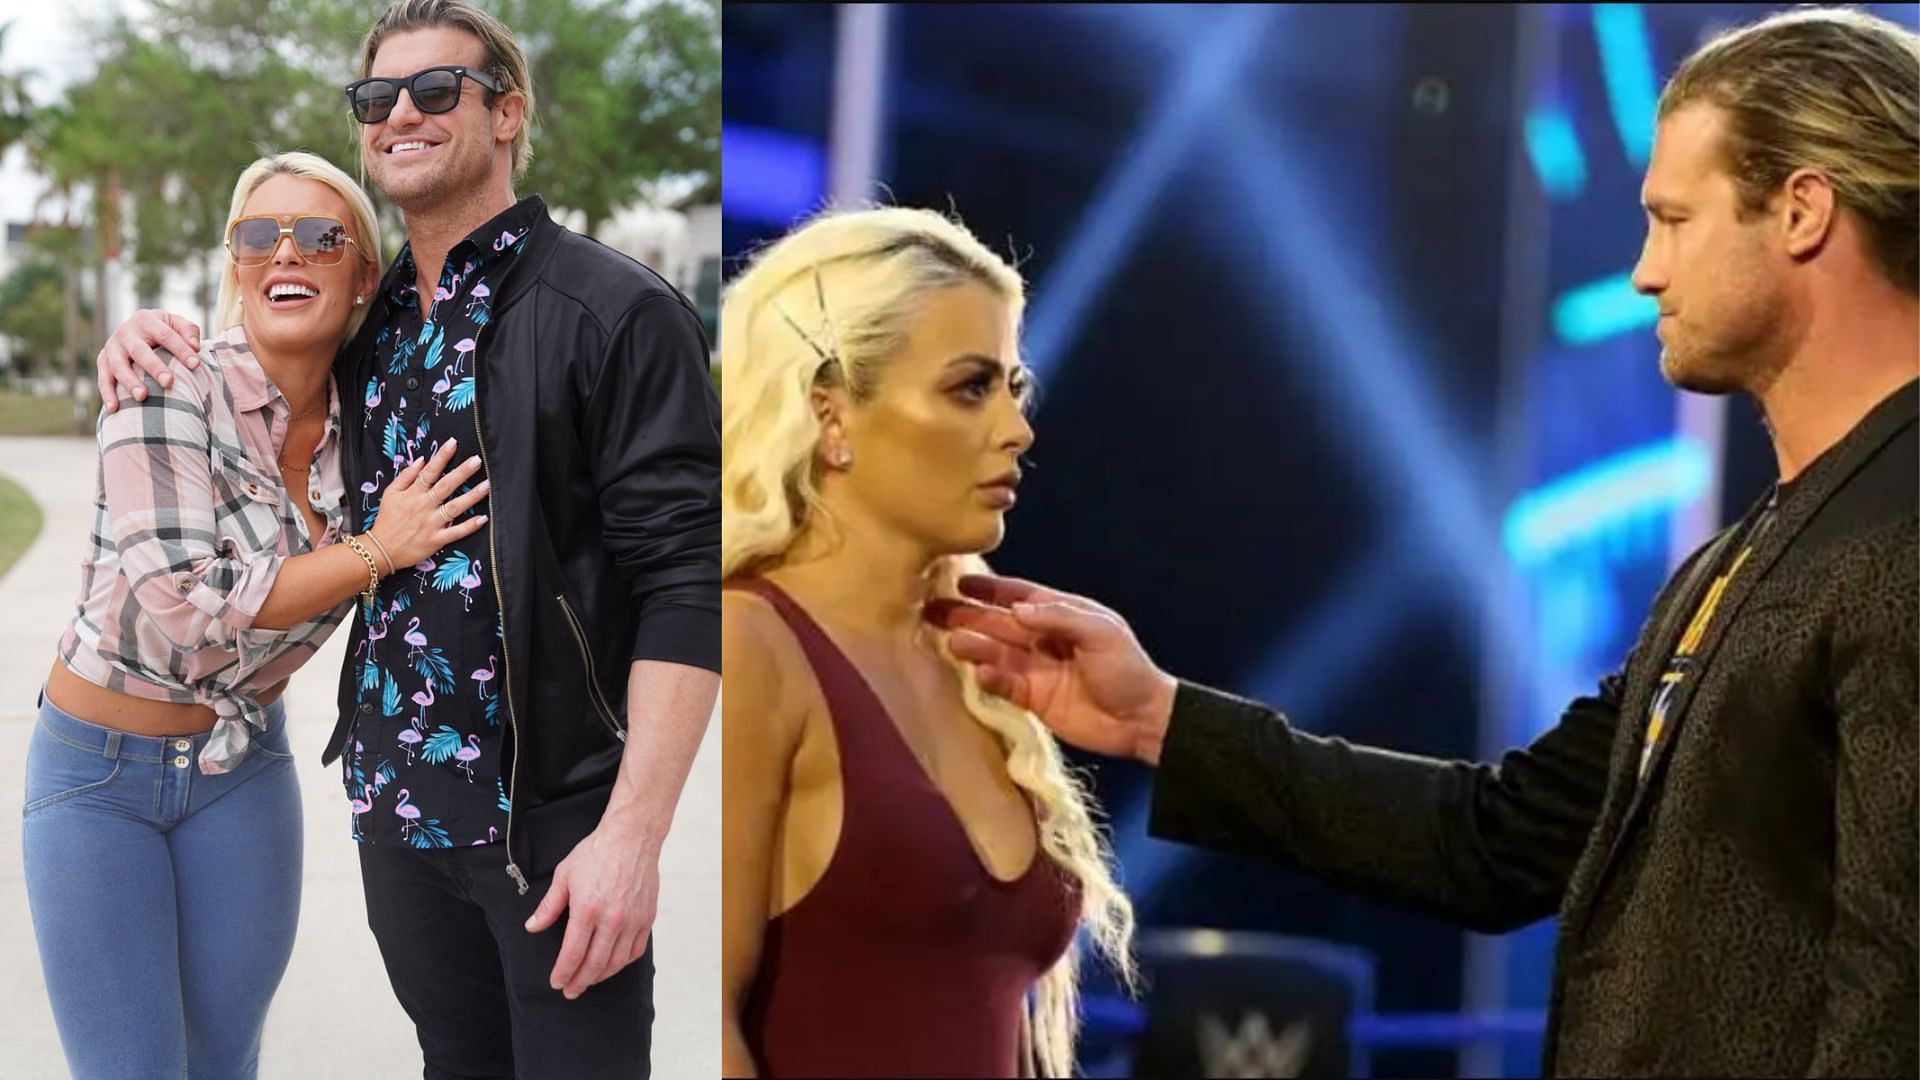 Were WWE stars Dolph Ziggler and Mandy Rose actually dating?